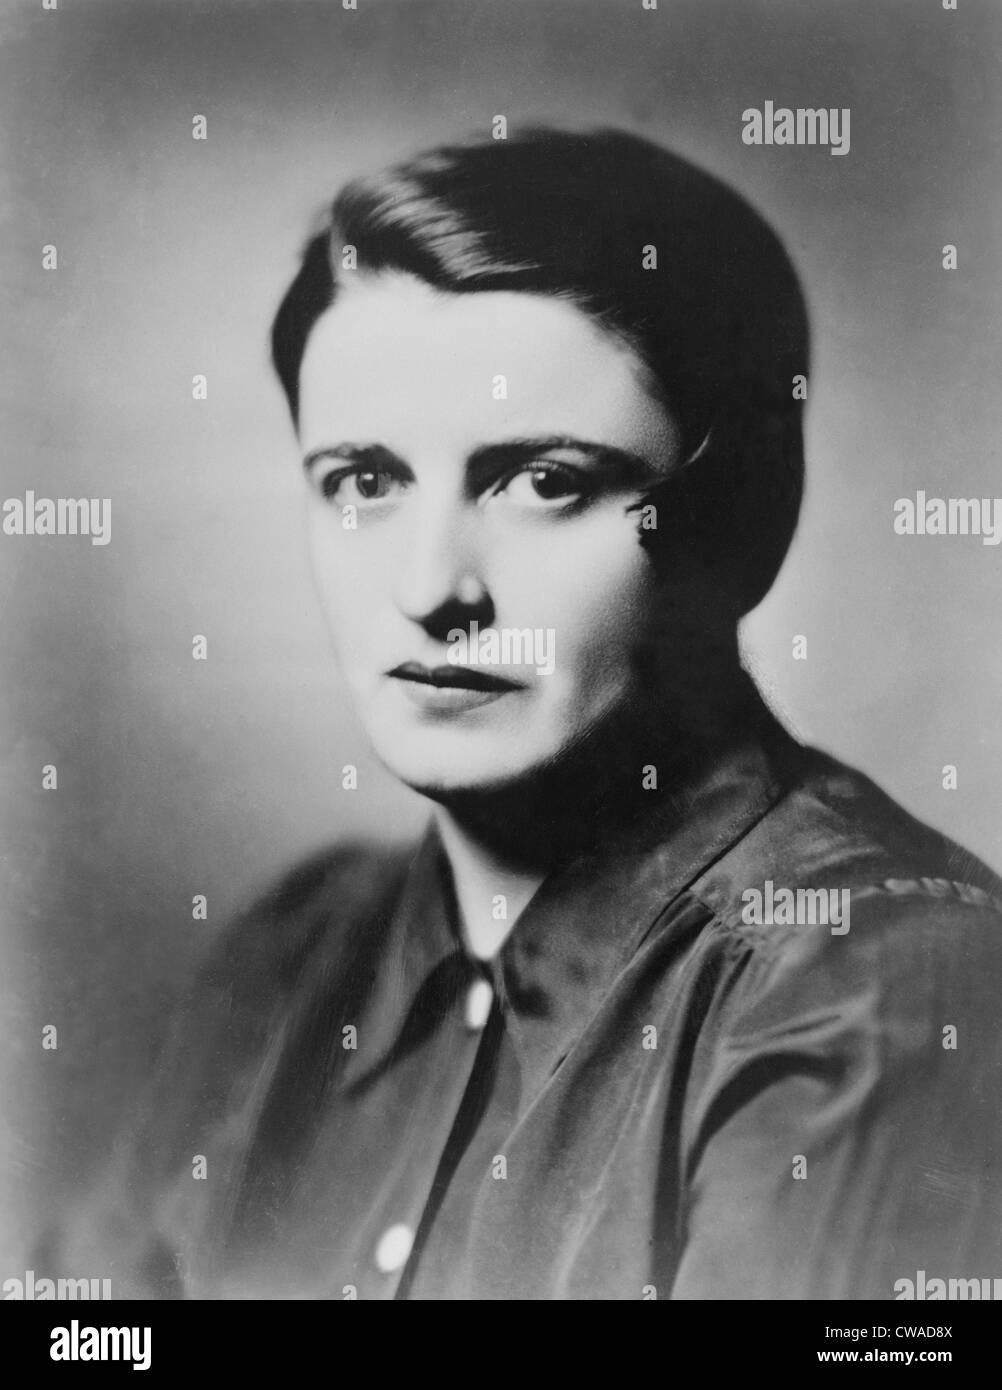 Ayn Rand (1905-1982) Russian born and educated author of popular novels, espoused her philosophy of Objectivism, an extreme Stock Photo